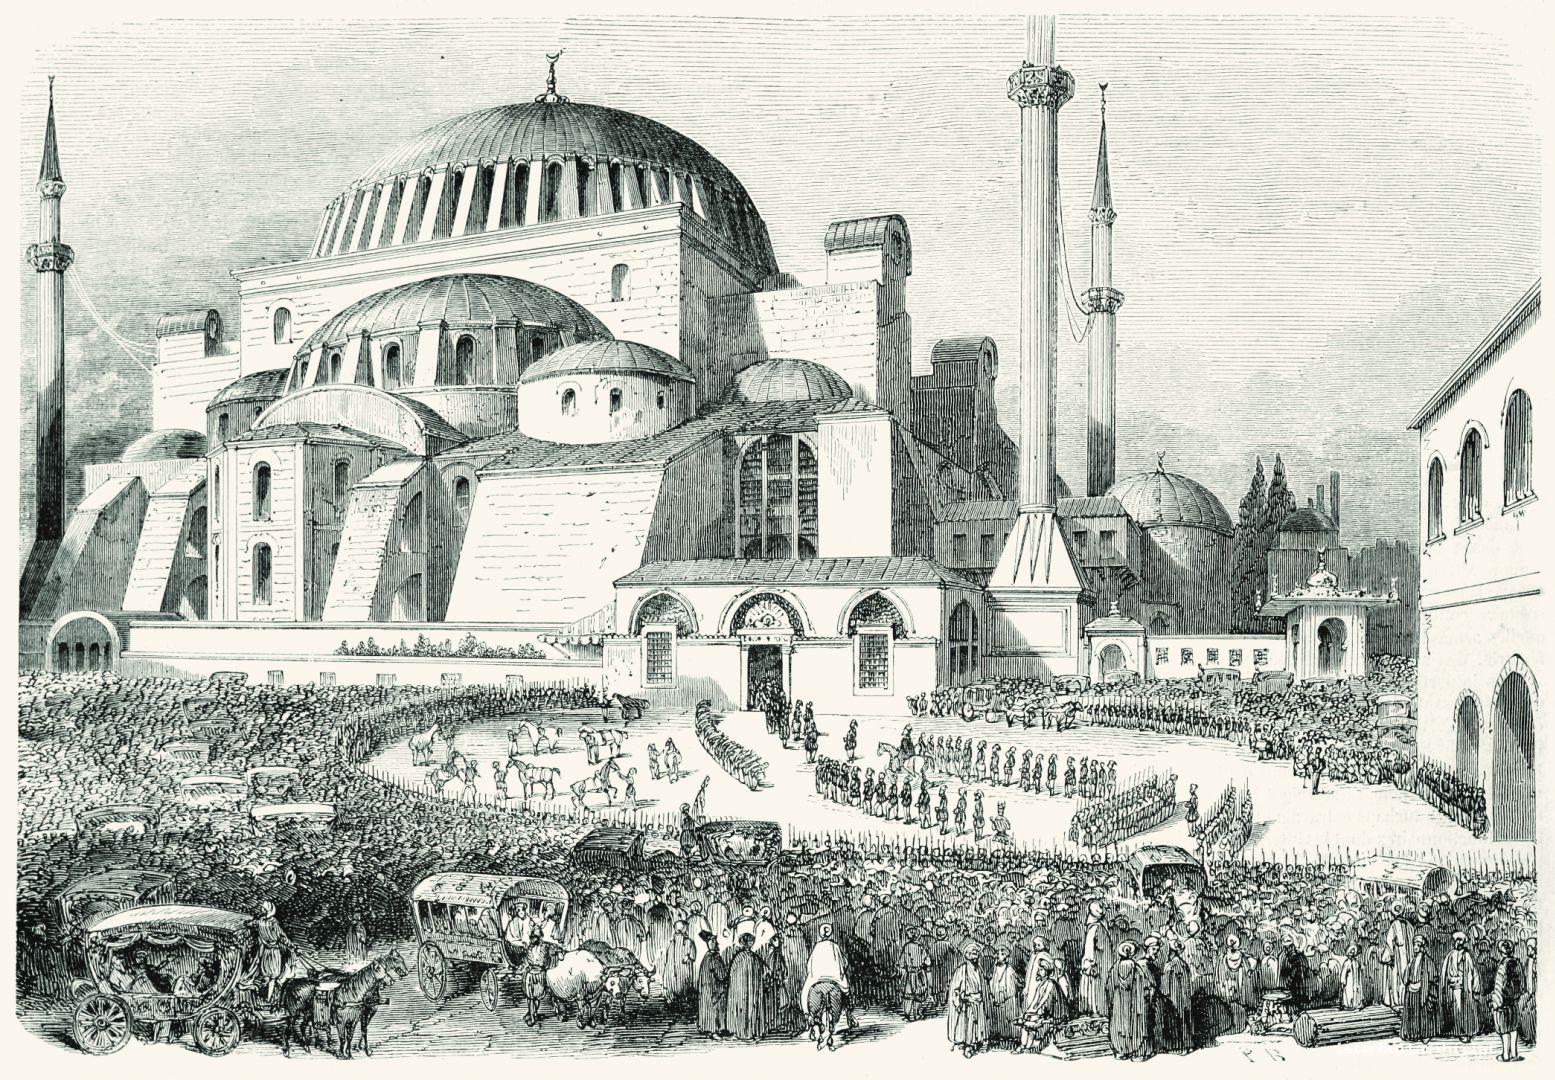 1- The ceremony organized during the period of Sultan Abdülmecid on the occasion of the restoration of Ayasofya Mosque (<em>L’Illustration</em>)